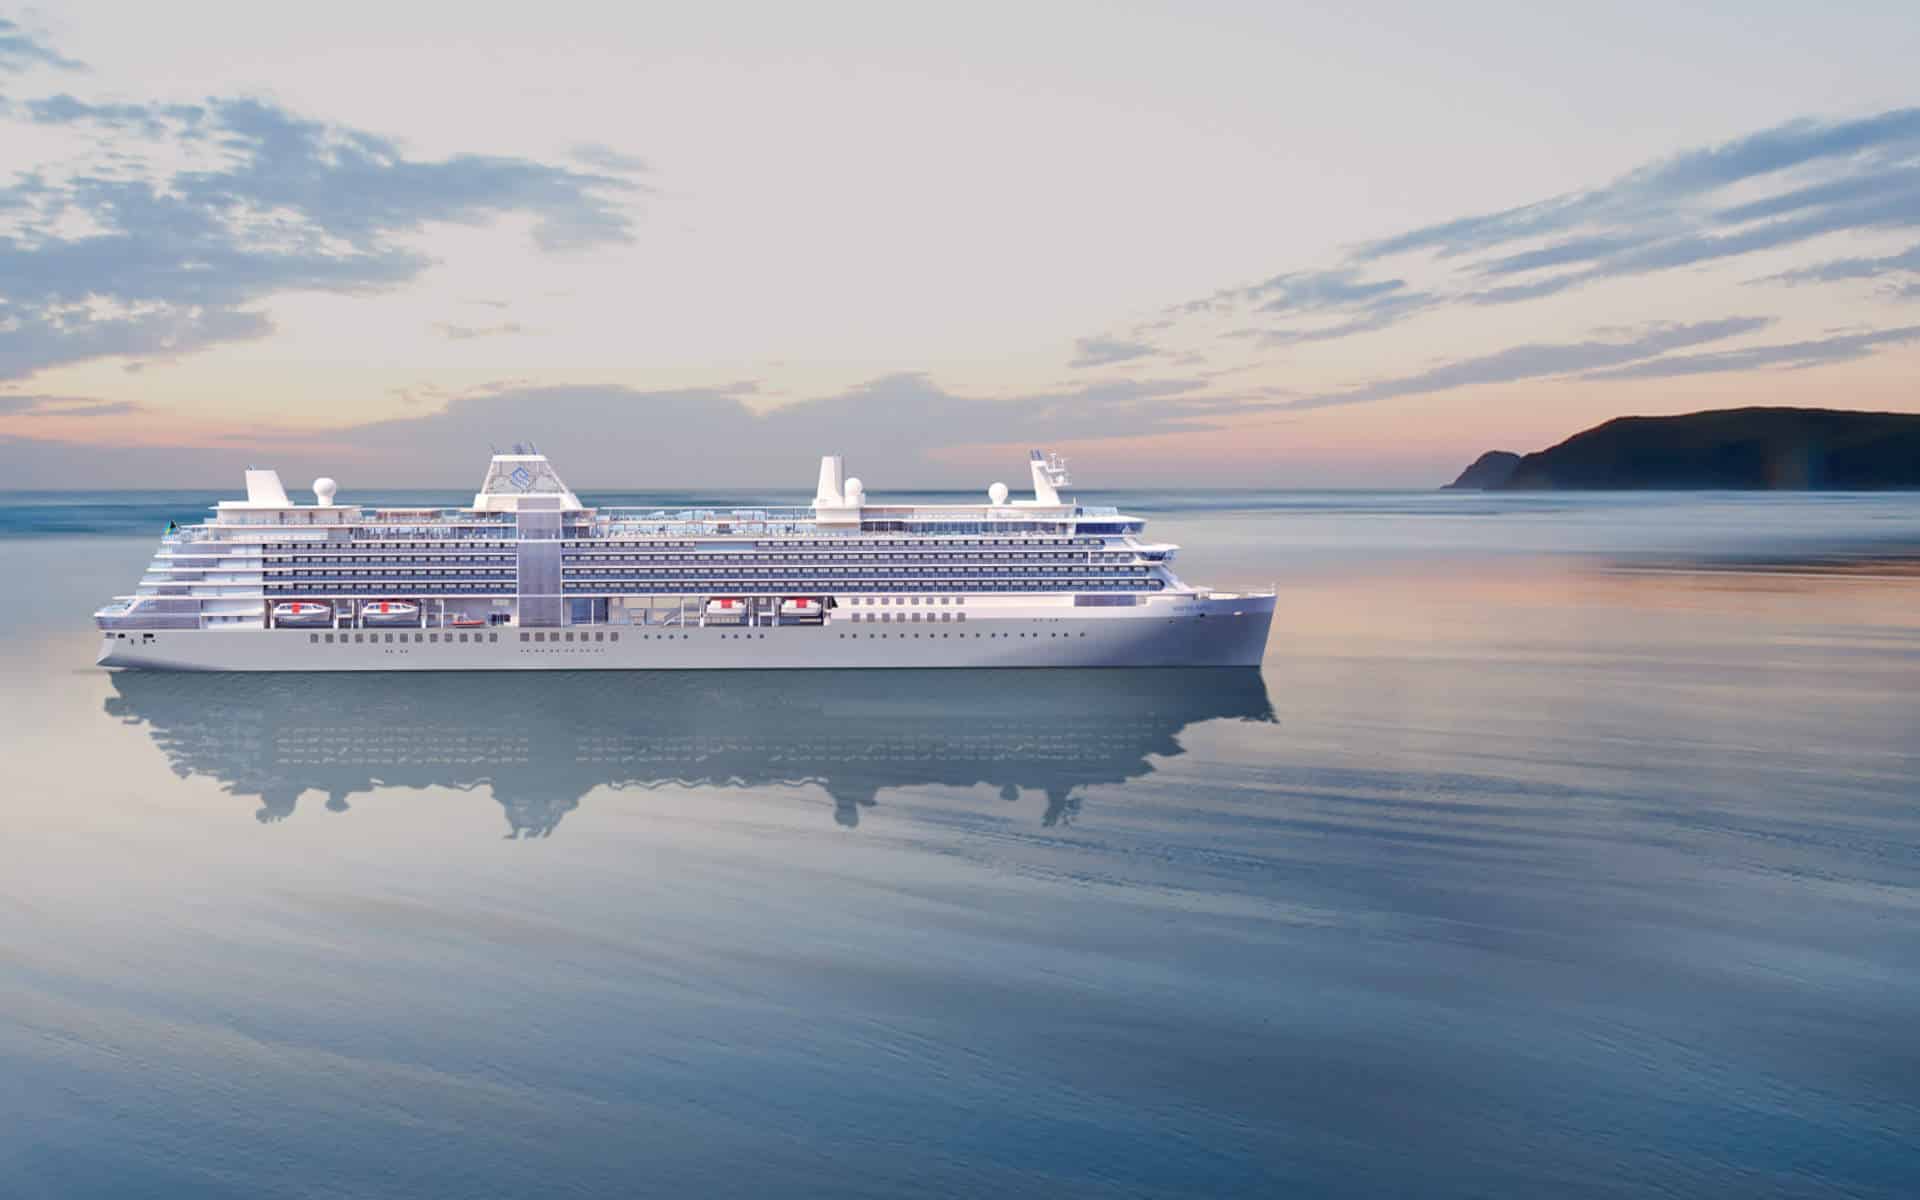 A rendering of the new hybrid-electric LNG-powered Silver Nova cruise ship.